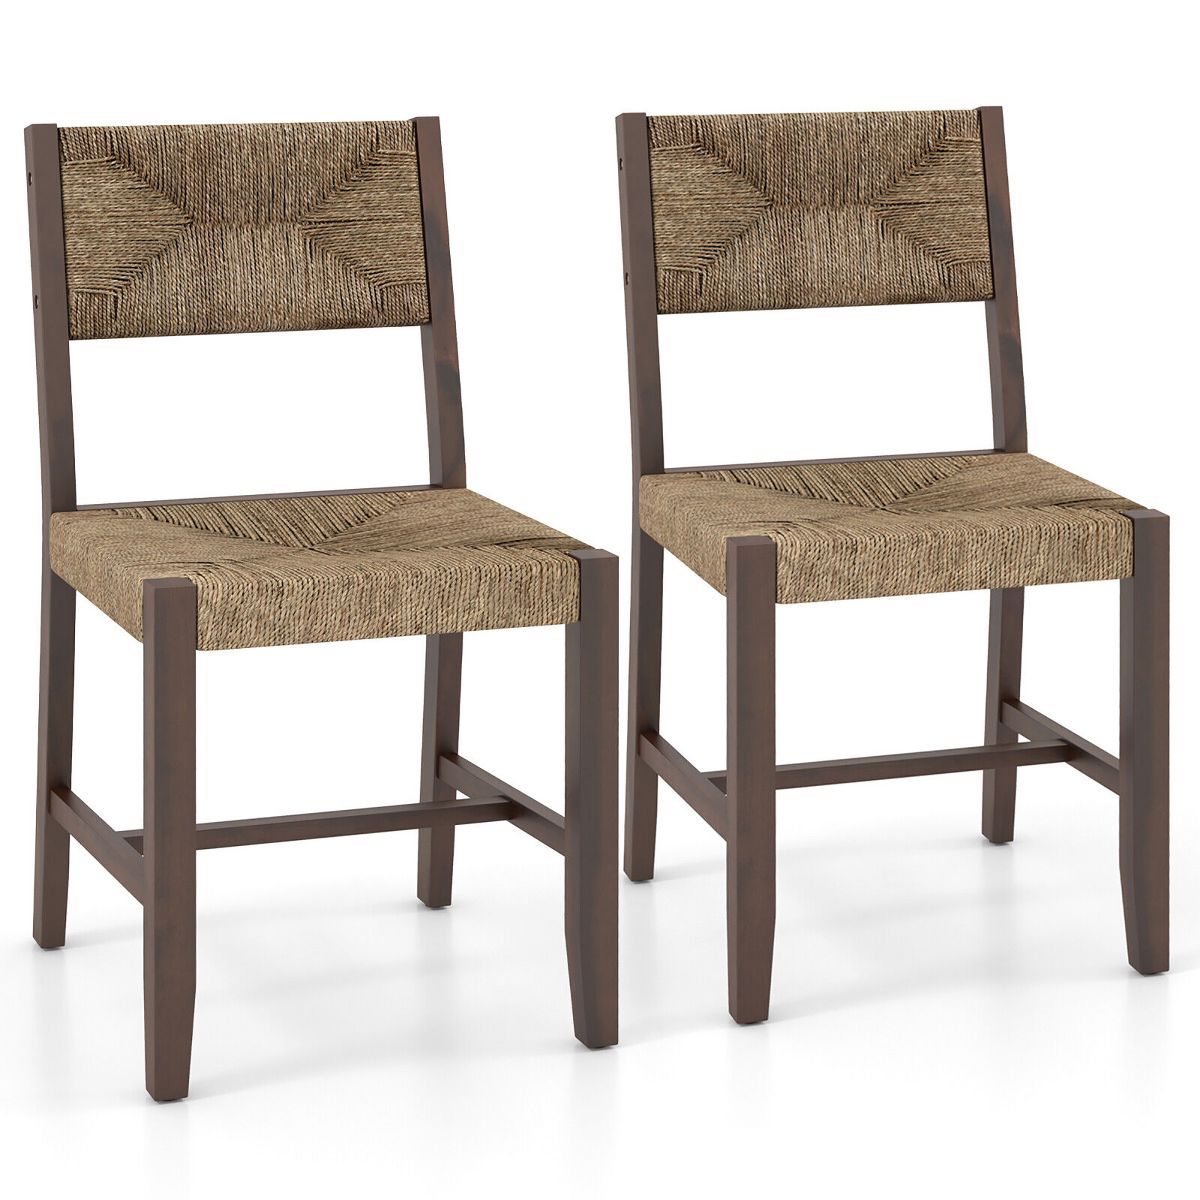 Tangkula Wooden Dining Chair Set of 2 w/ Natural Weave Seagrass Rattan Backrest & Seat | Target